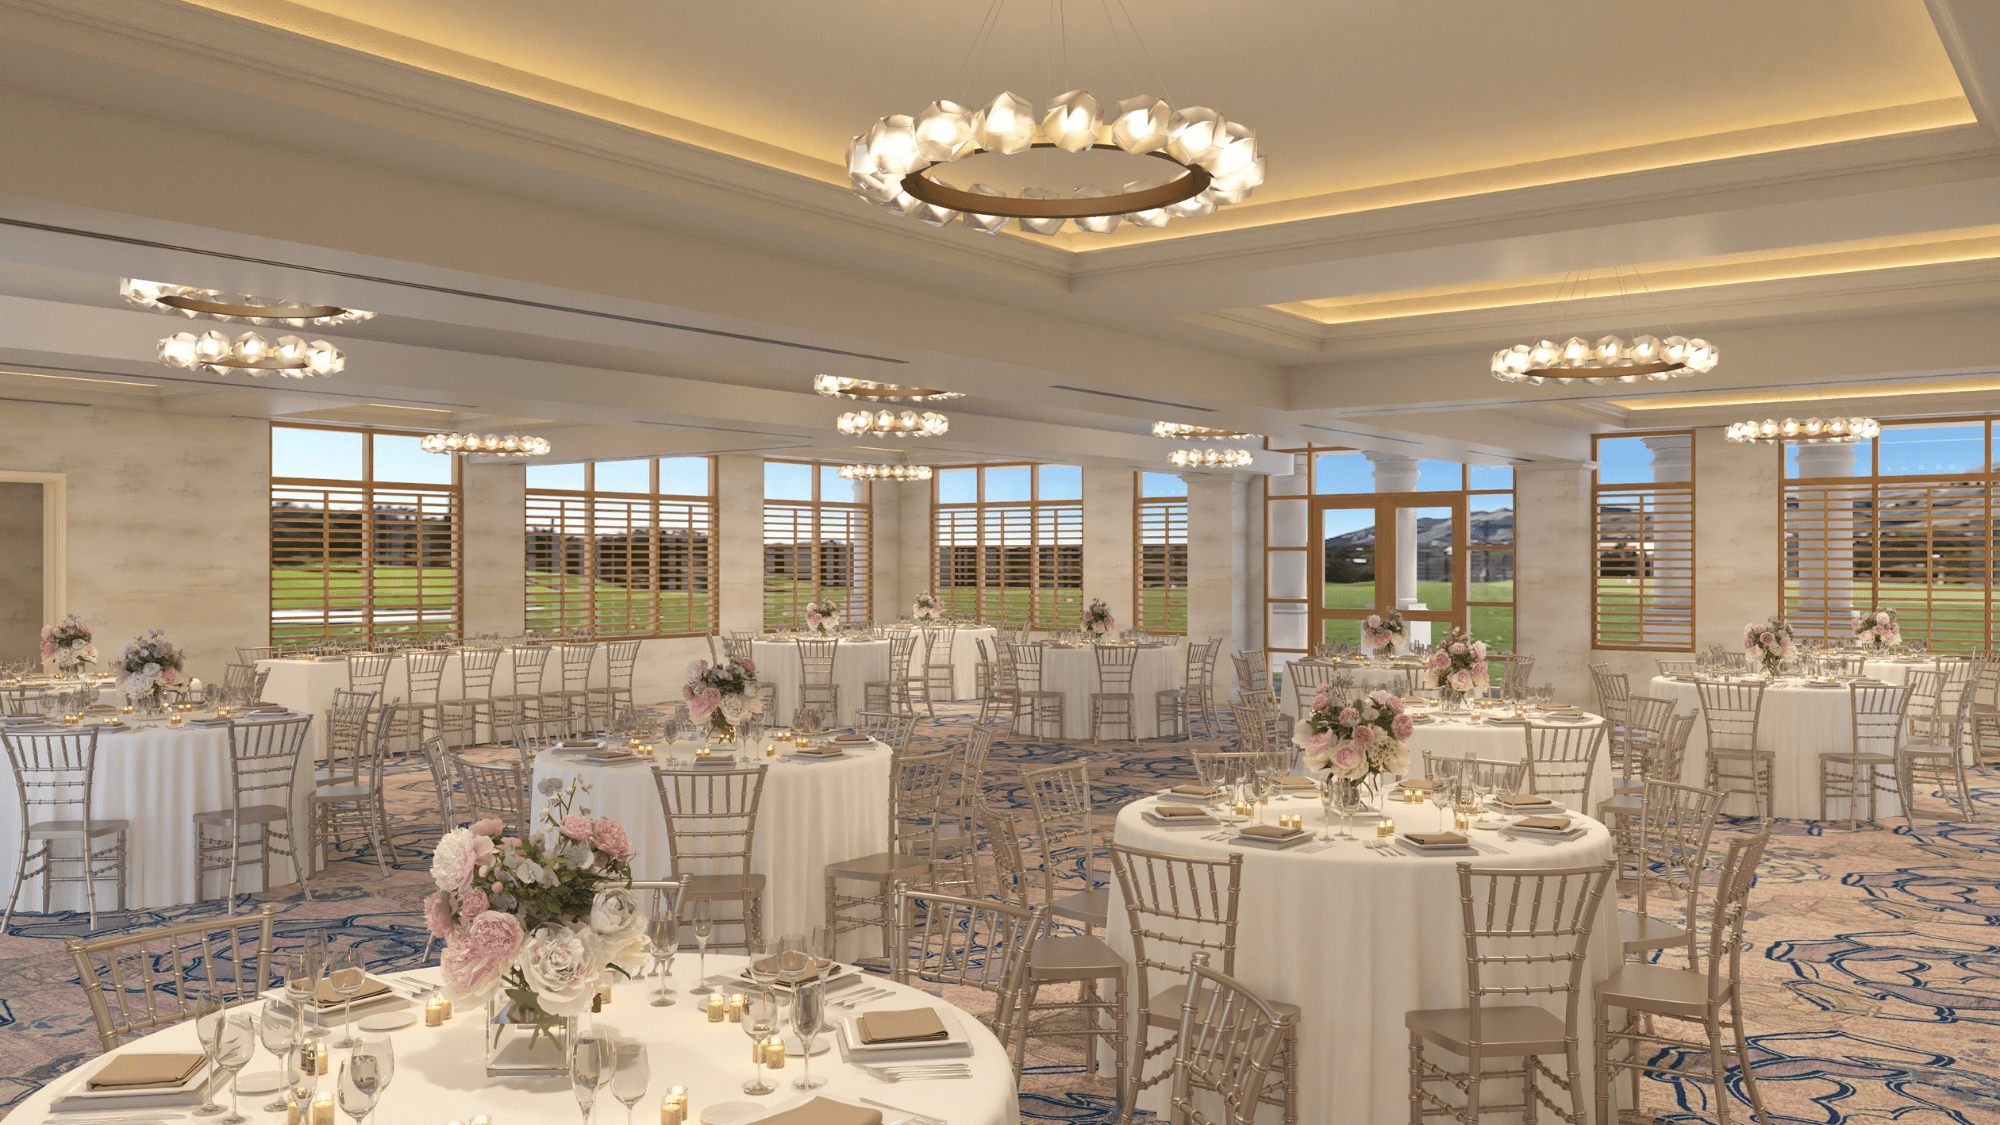 Venue room with tables and chairs